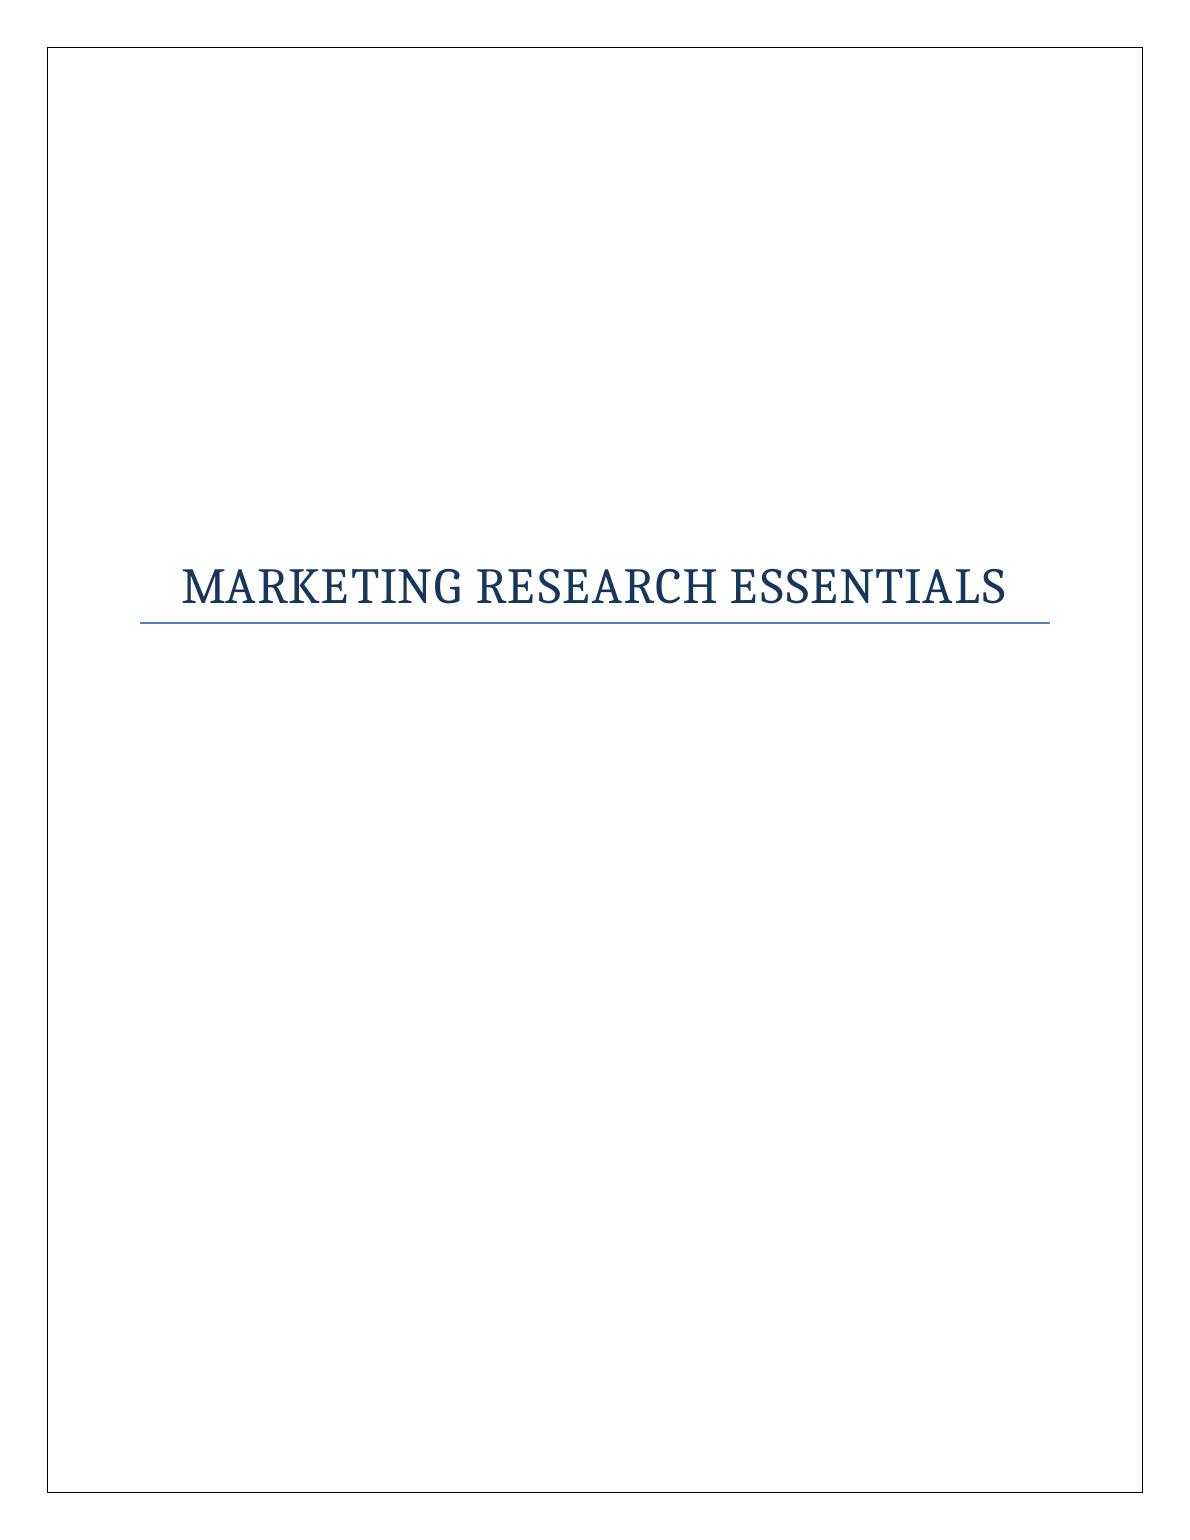 Marketing Research Essentials : Assignment_1